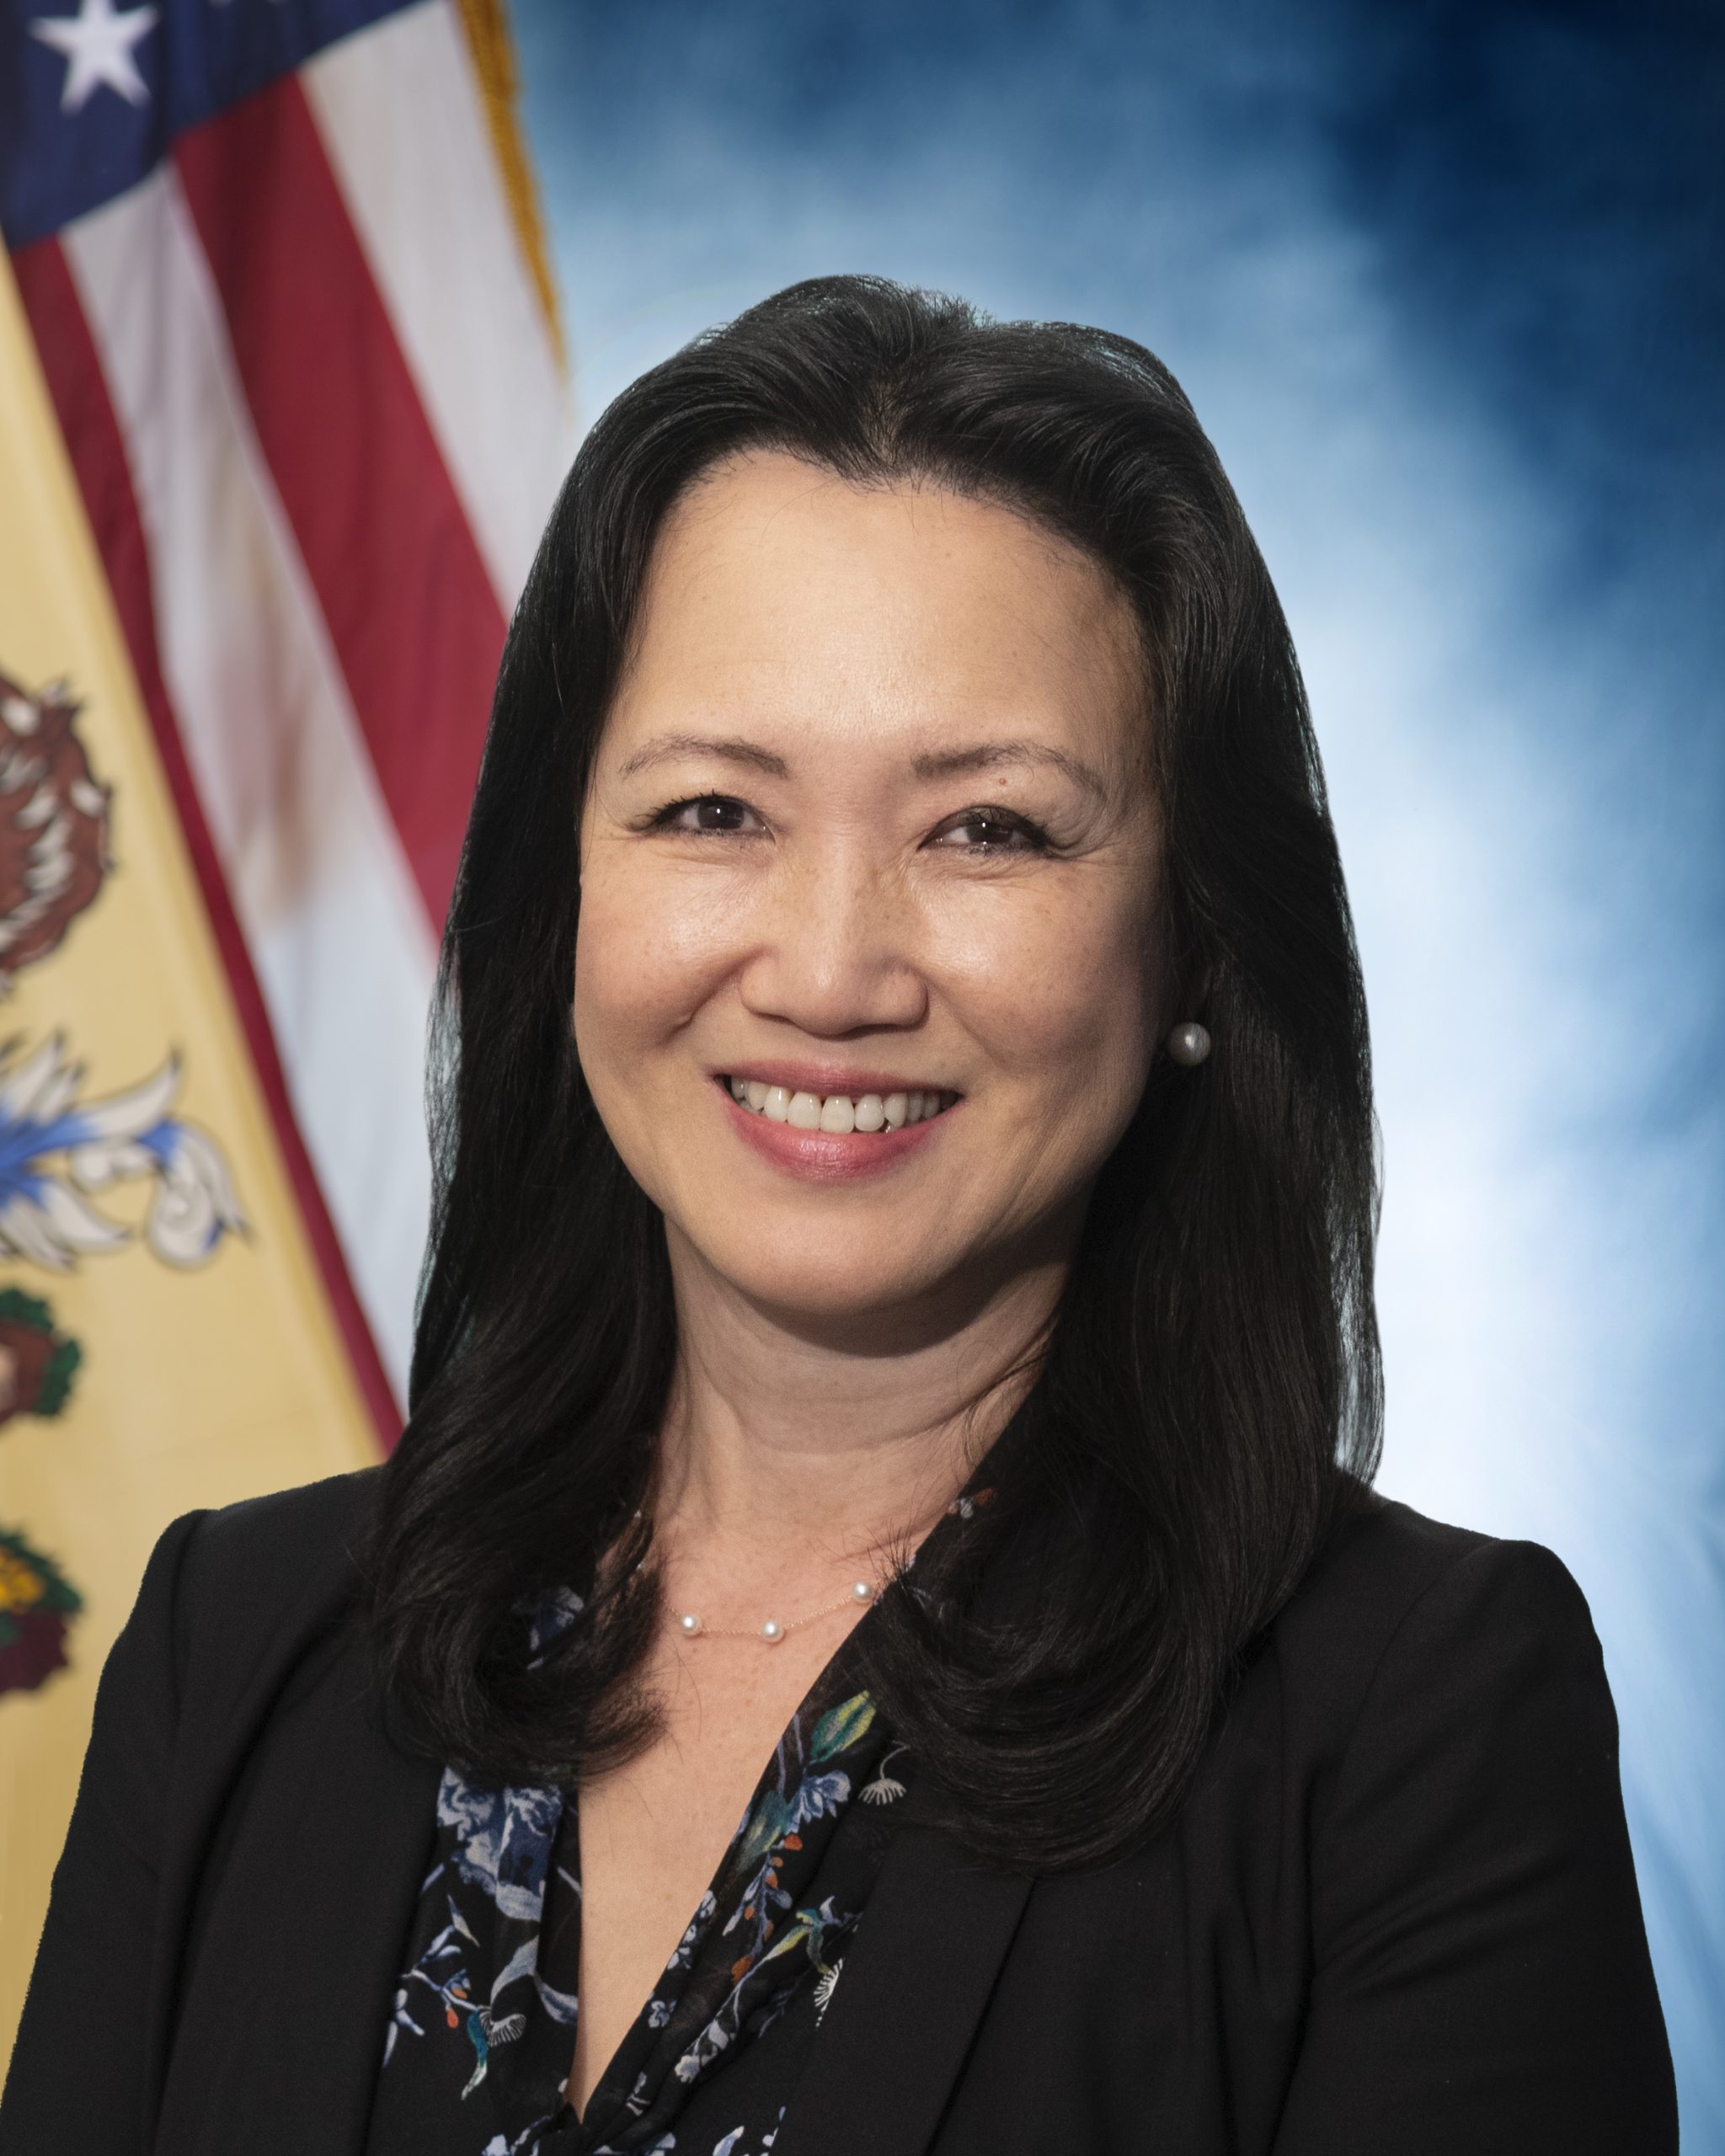 </p>
<h3 style="color:white;">Miae Park</h3>
<h5 style="color:white;font-style:italic;">Assistant Attorney General/Senior Counsel to the Attorney General</h5>
<p>